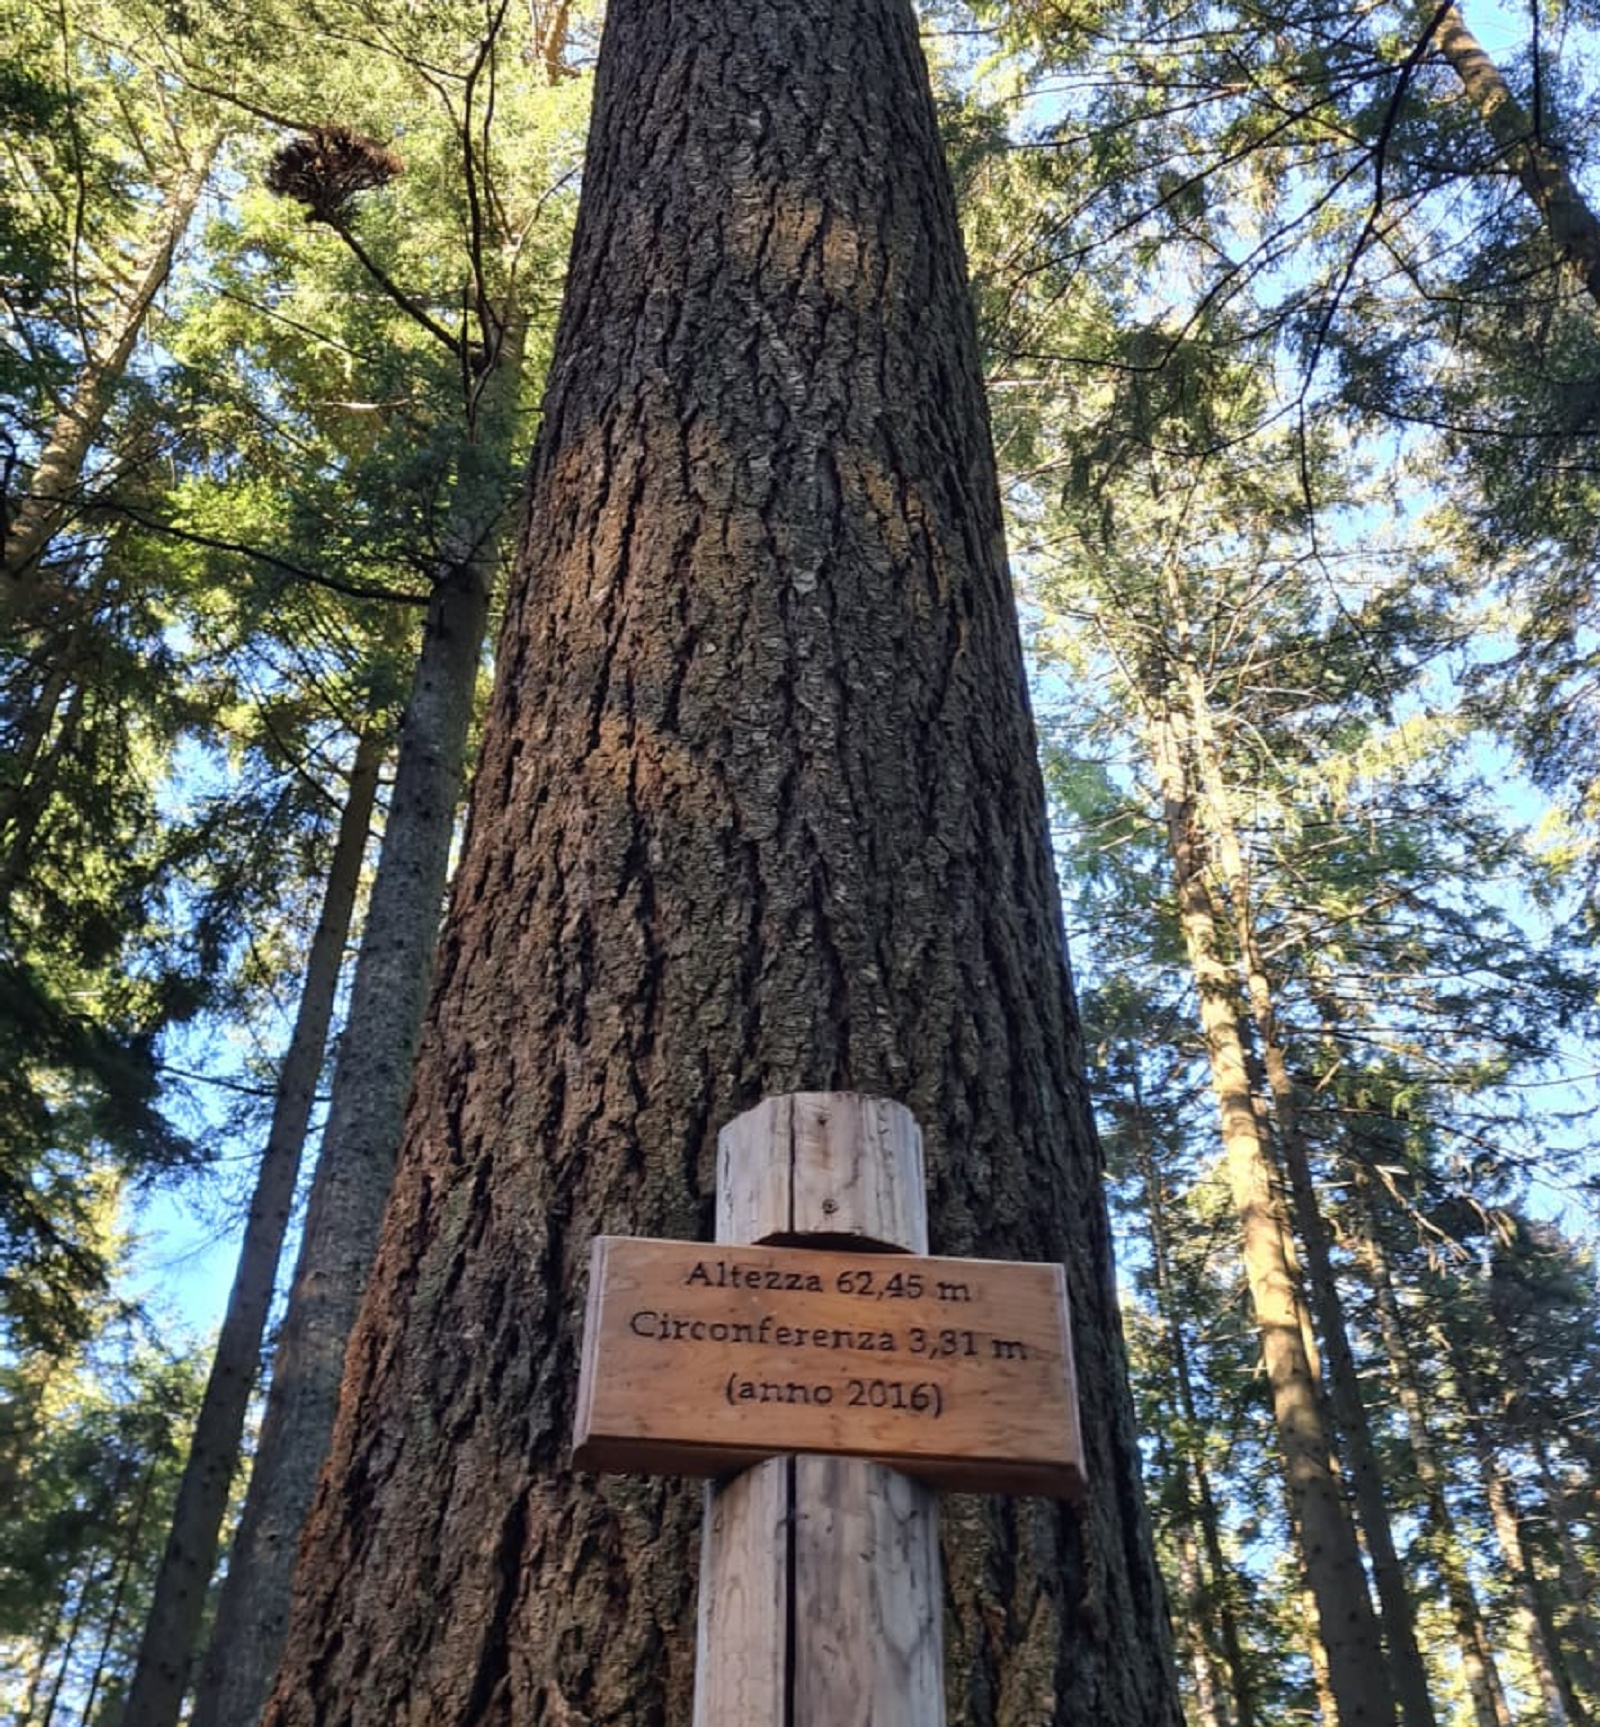 The tallest tree in Italy